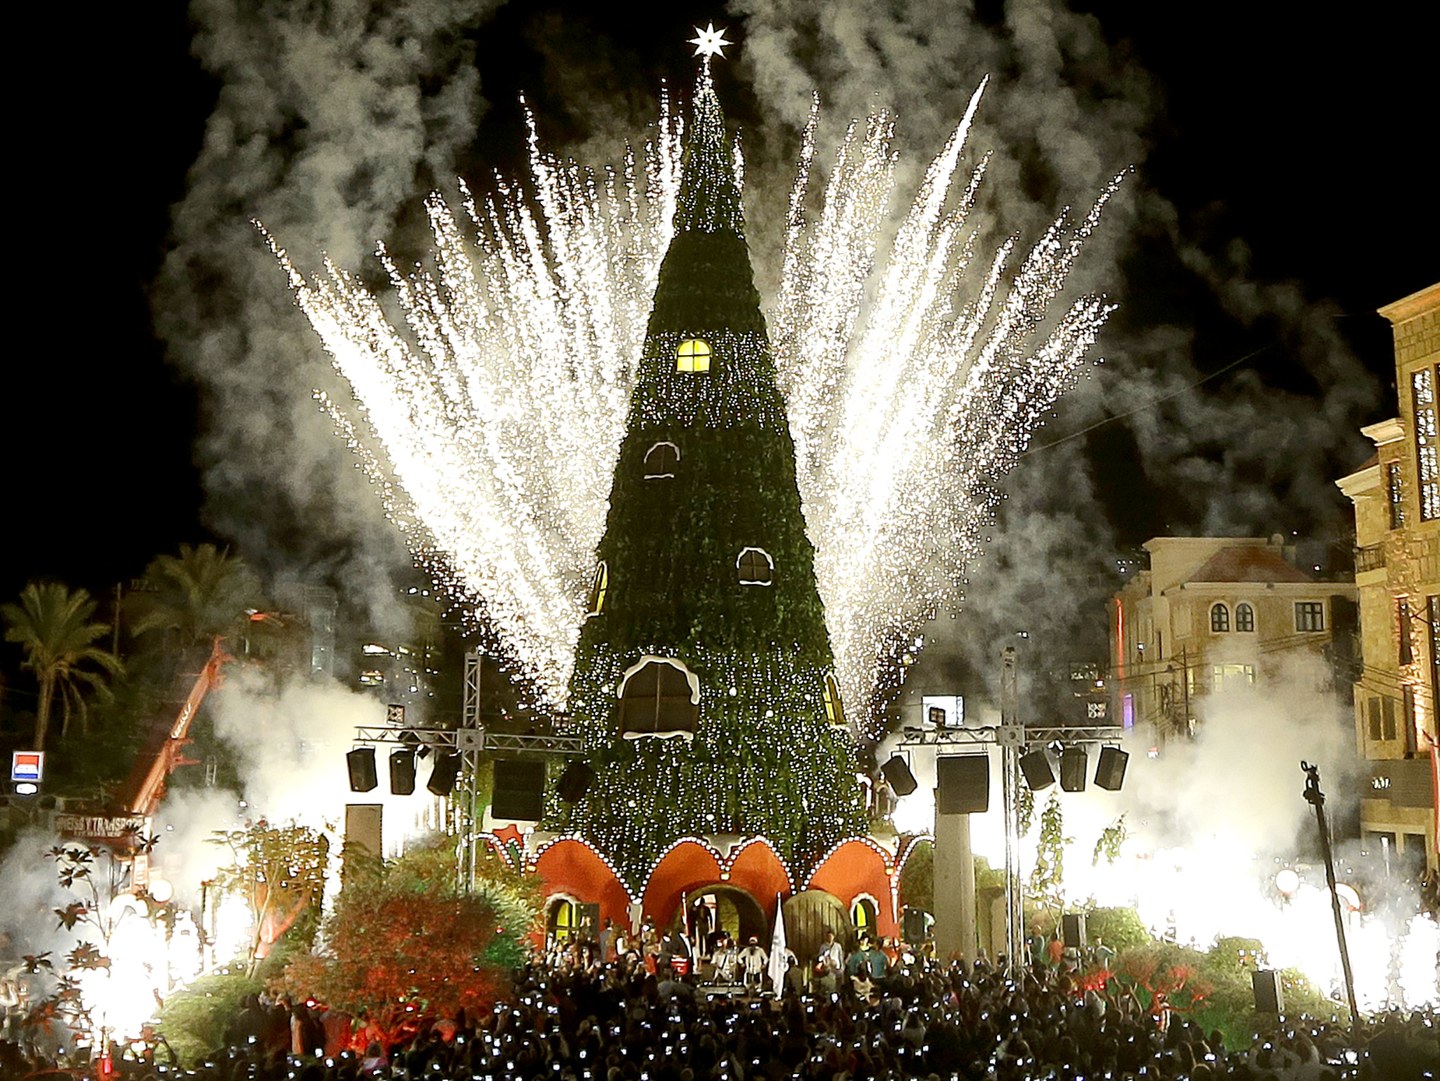 byblos-lebanon-christmas-tree-gettyimages-625569044